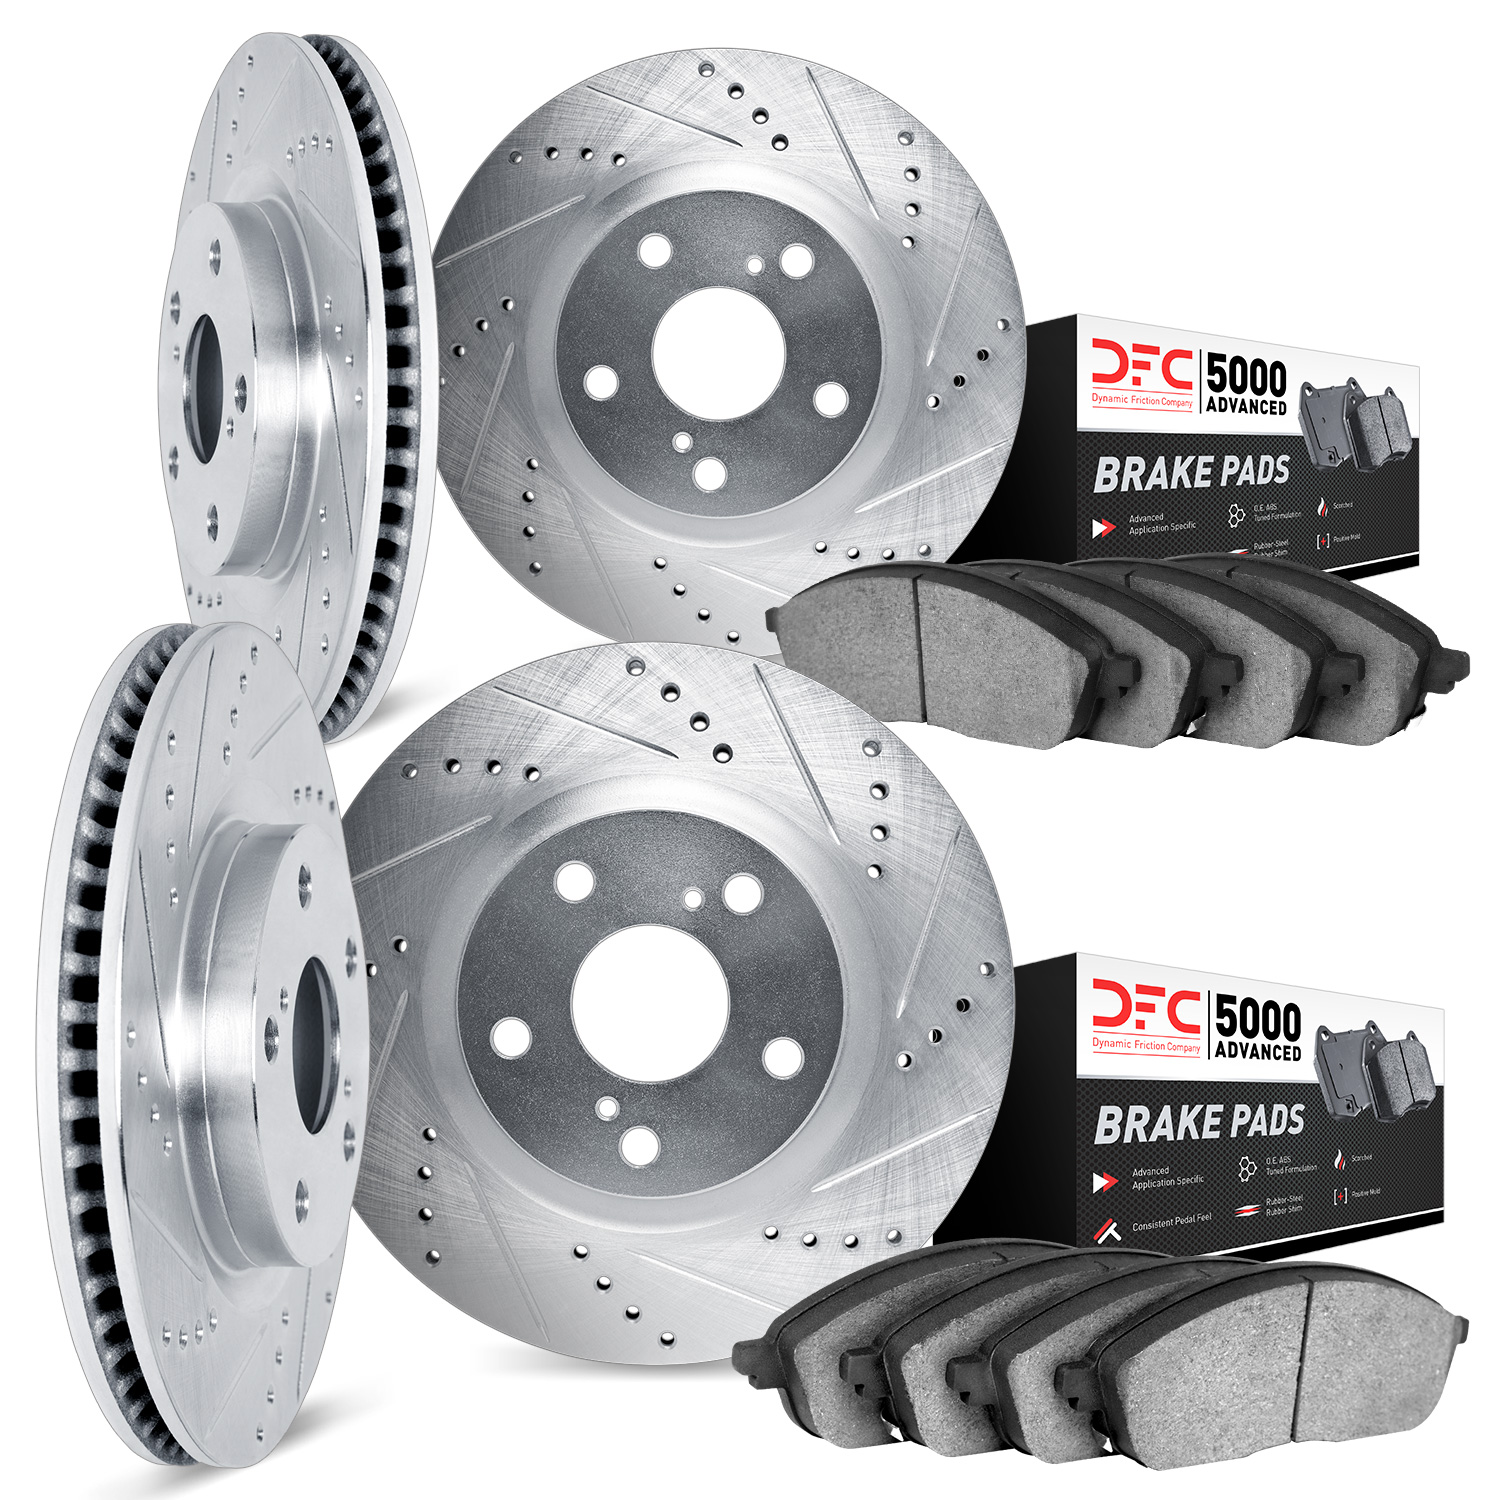 7504-47248 Drilled/Slotted Brake Rotors w/5000 Advanced Brake Pads Kit [Silver], 1994-1996 GM, Position: Front and Rear